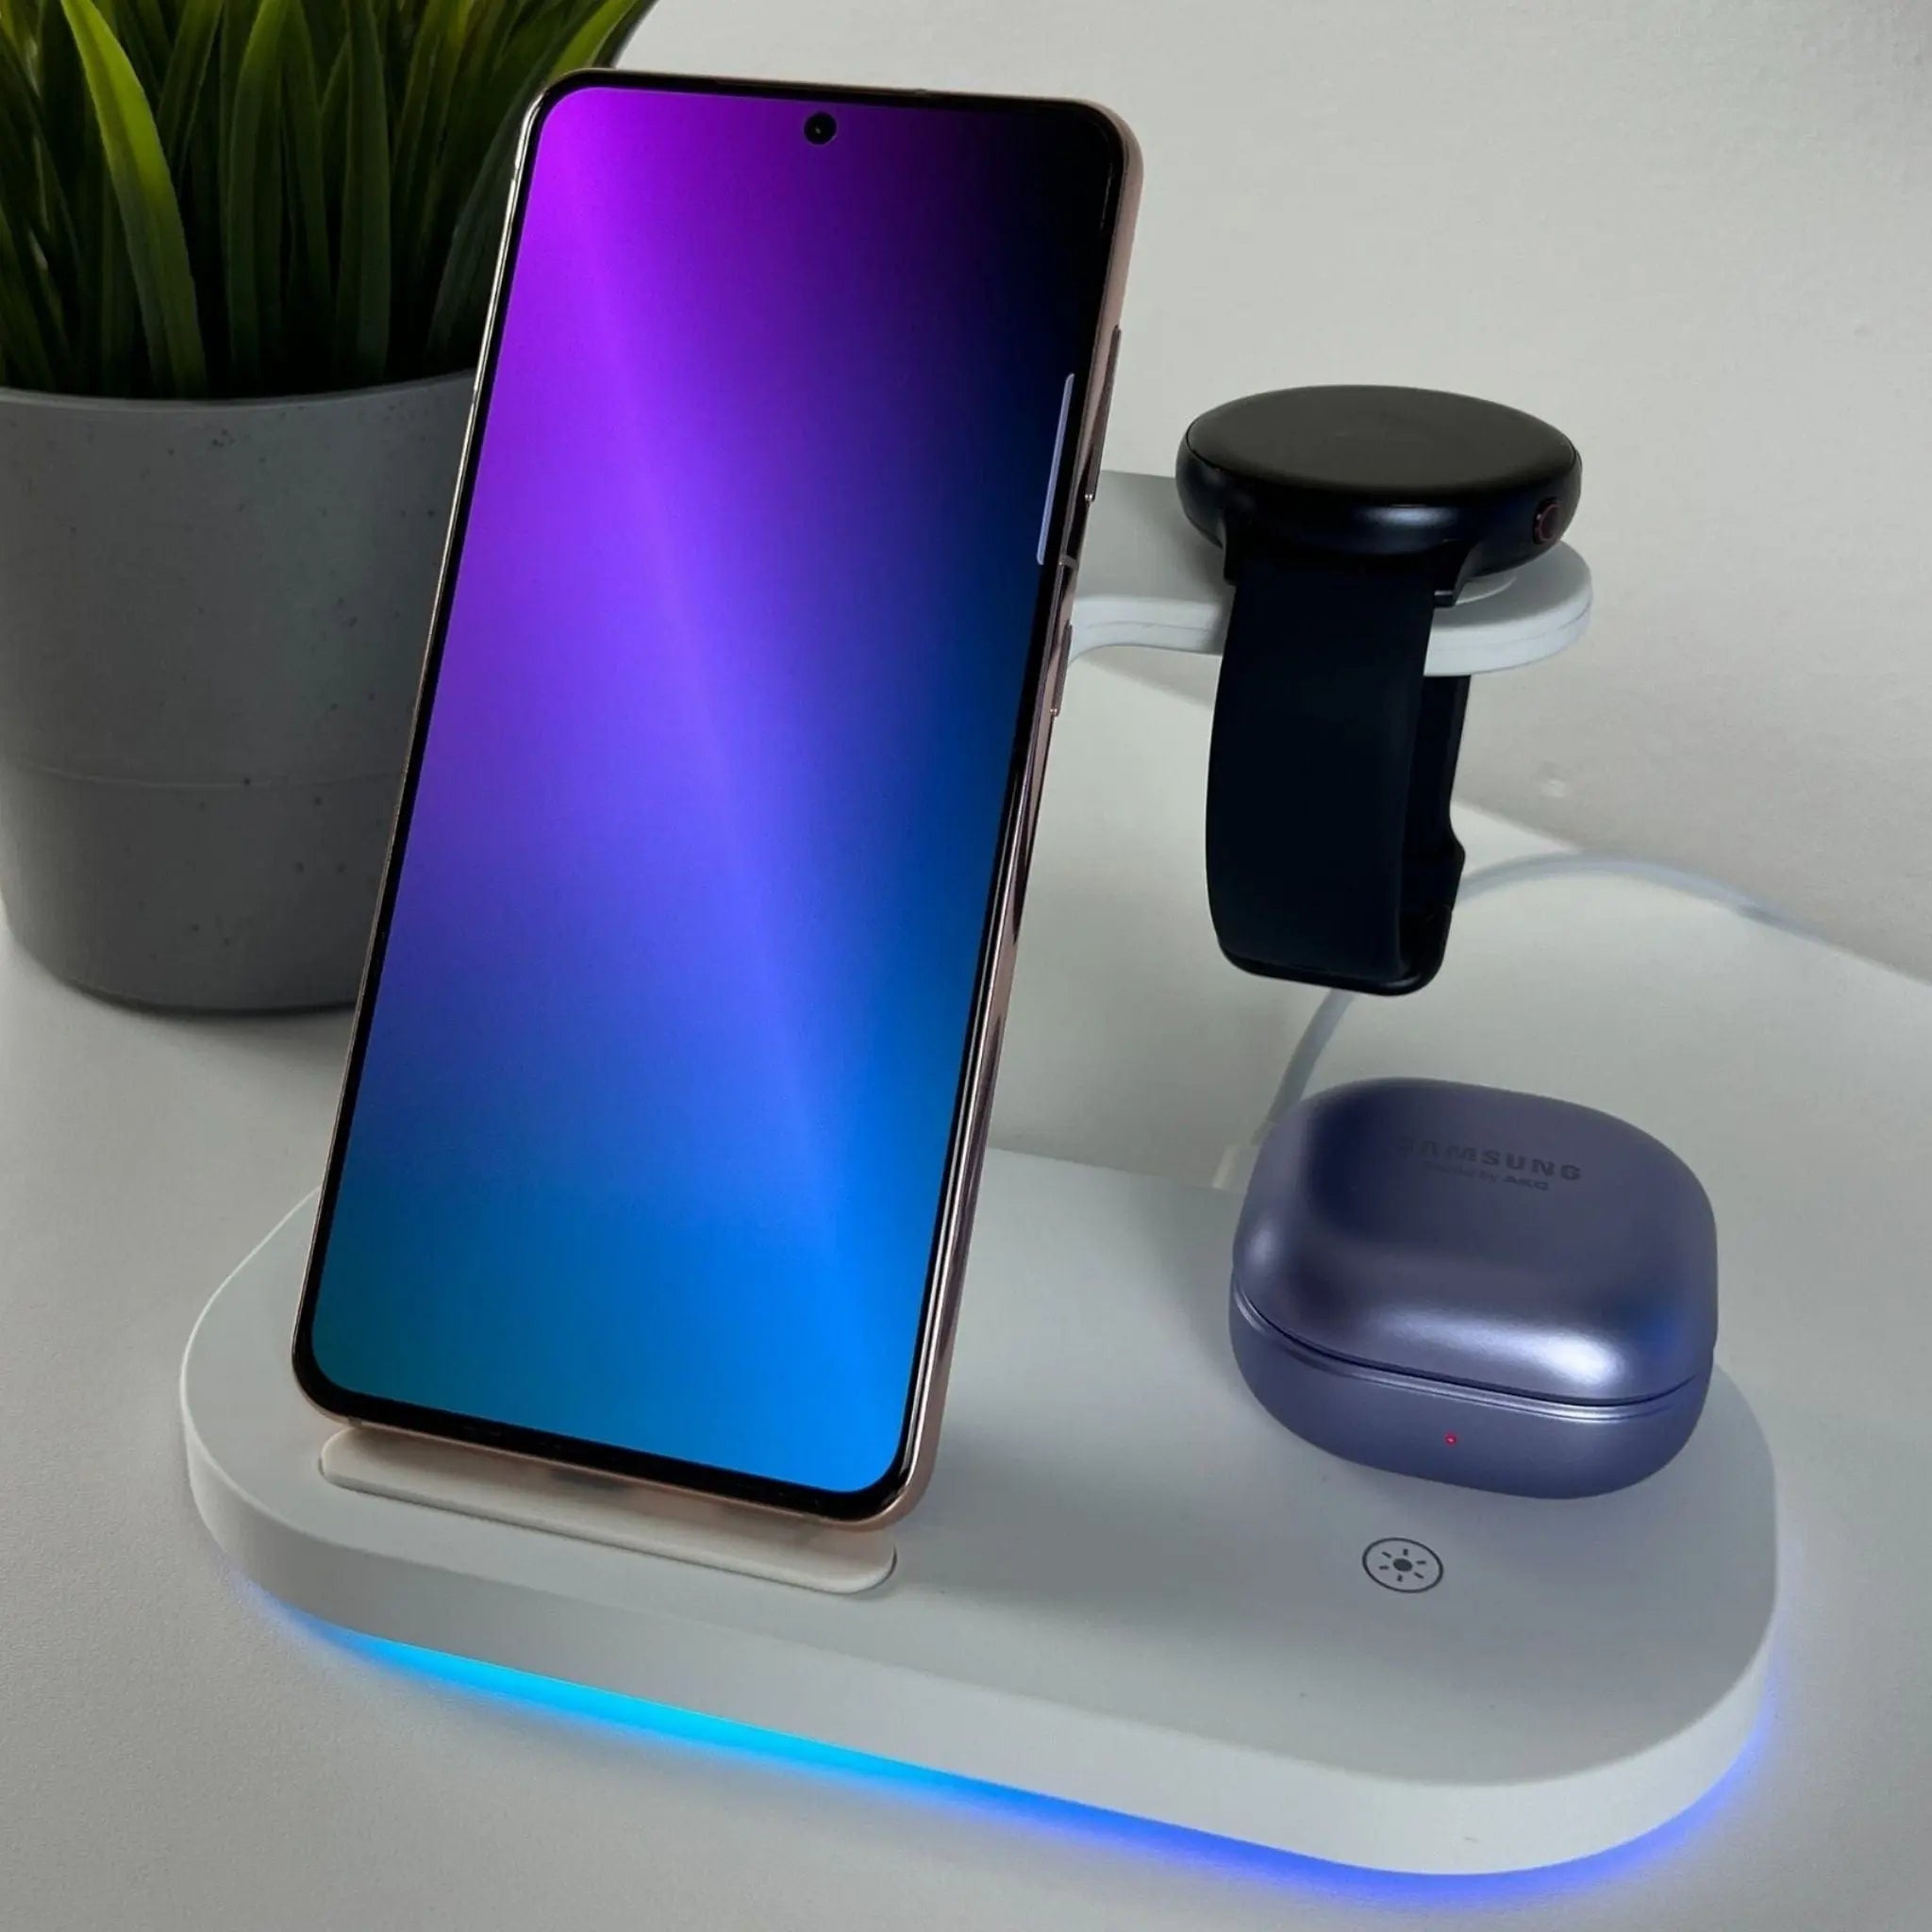 3 in 1 Samsung Wireless Charging Station with Samsung Galaxy S21, Samsung Watch, and Samsung Buds